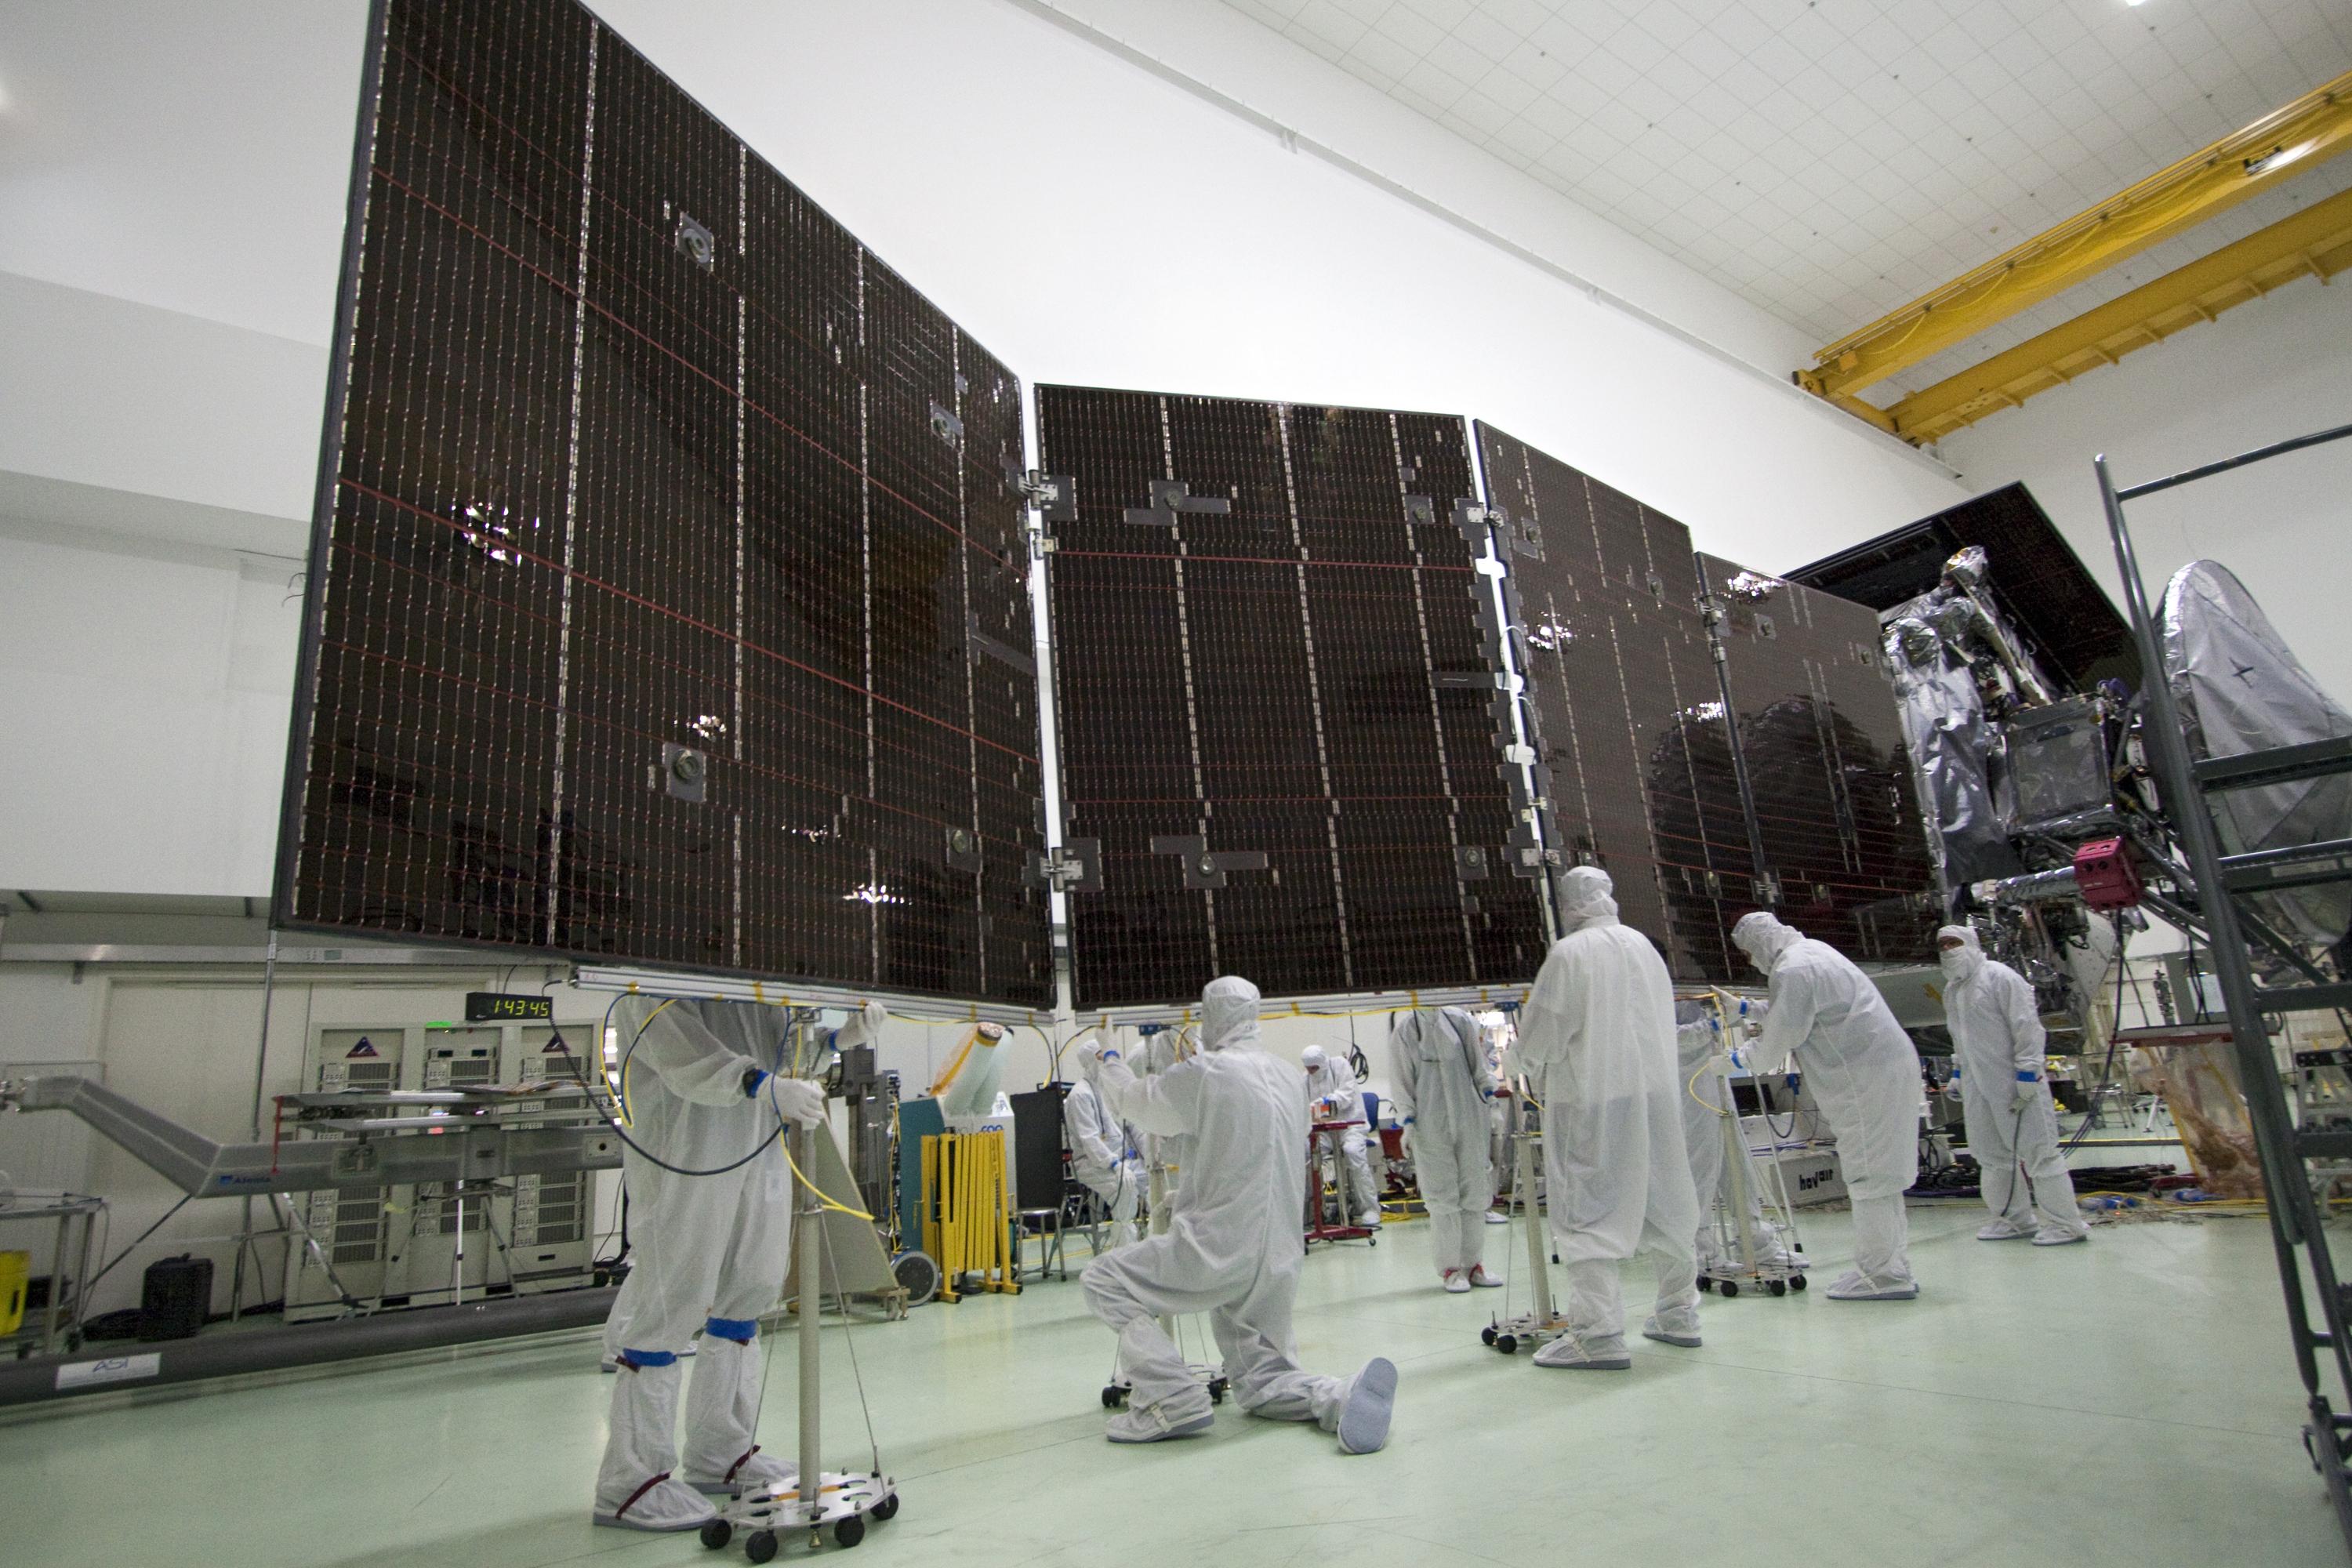 Five engineers in cleanroom suits inspect the Juno spacecraft's massive solar panels before launch.